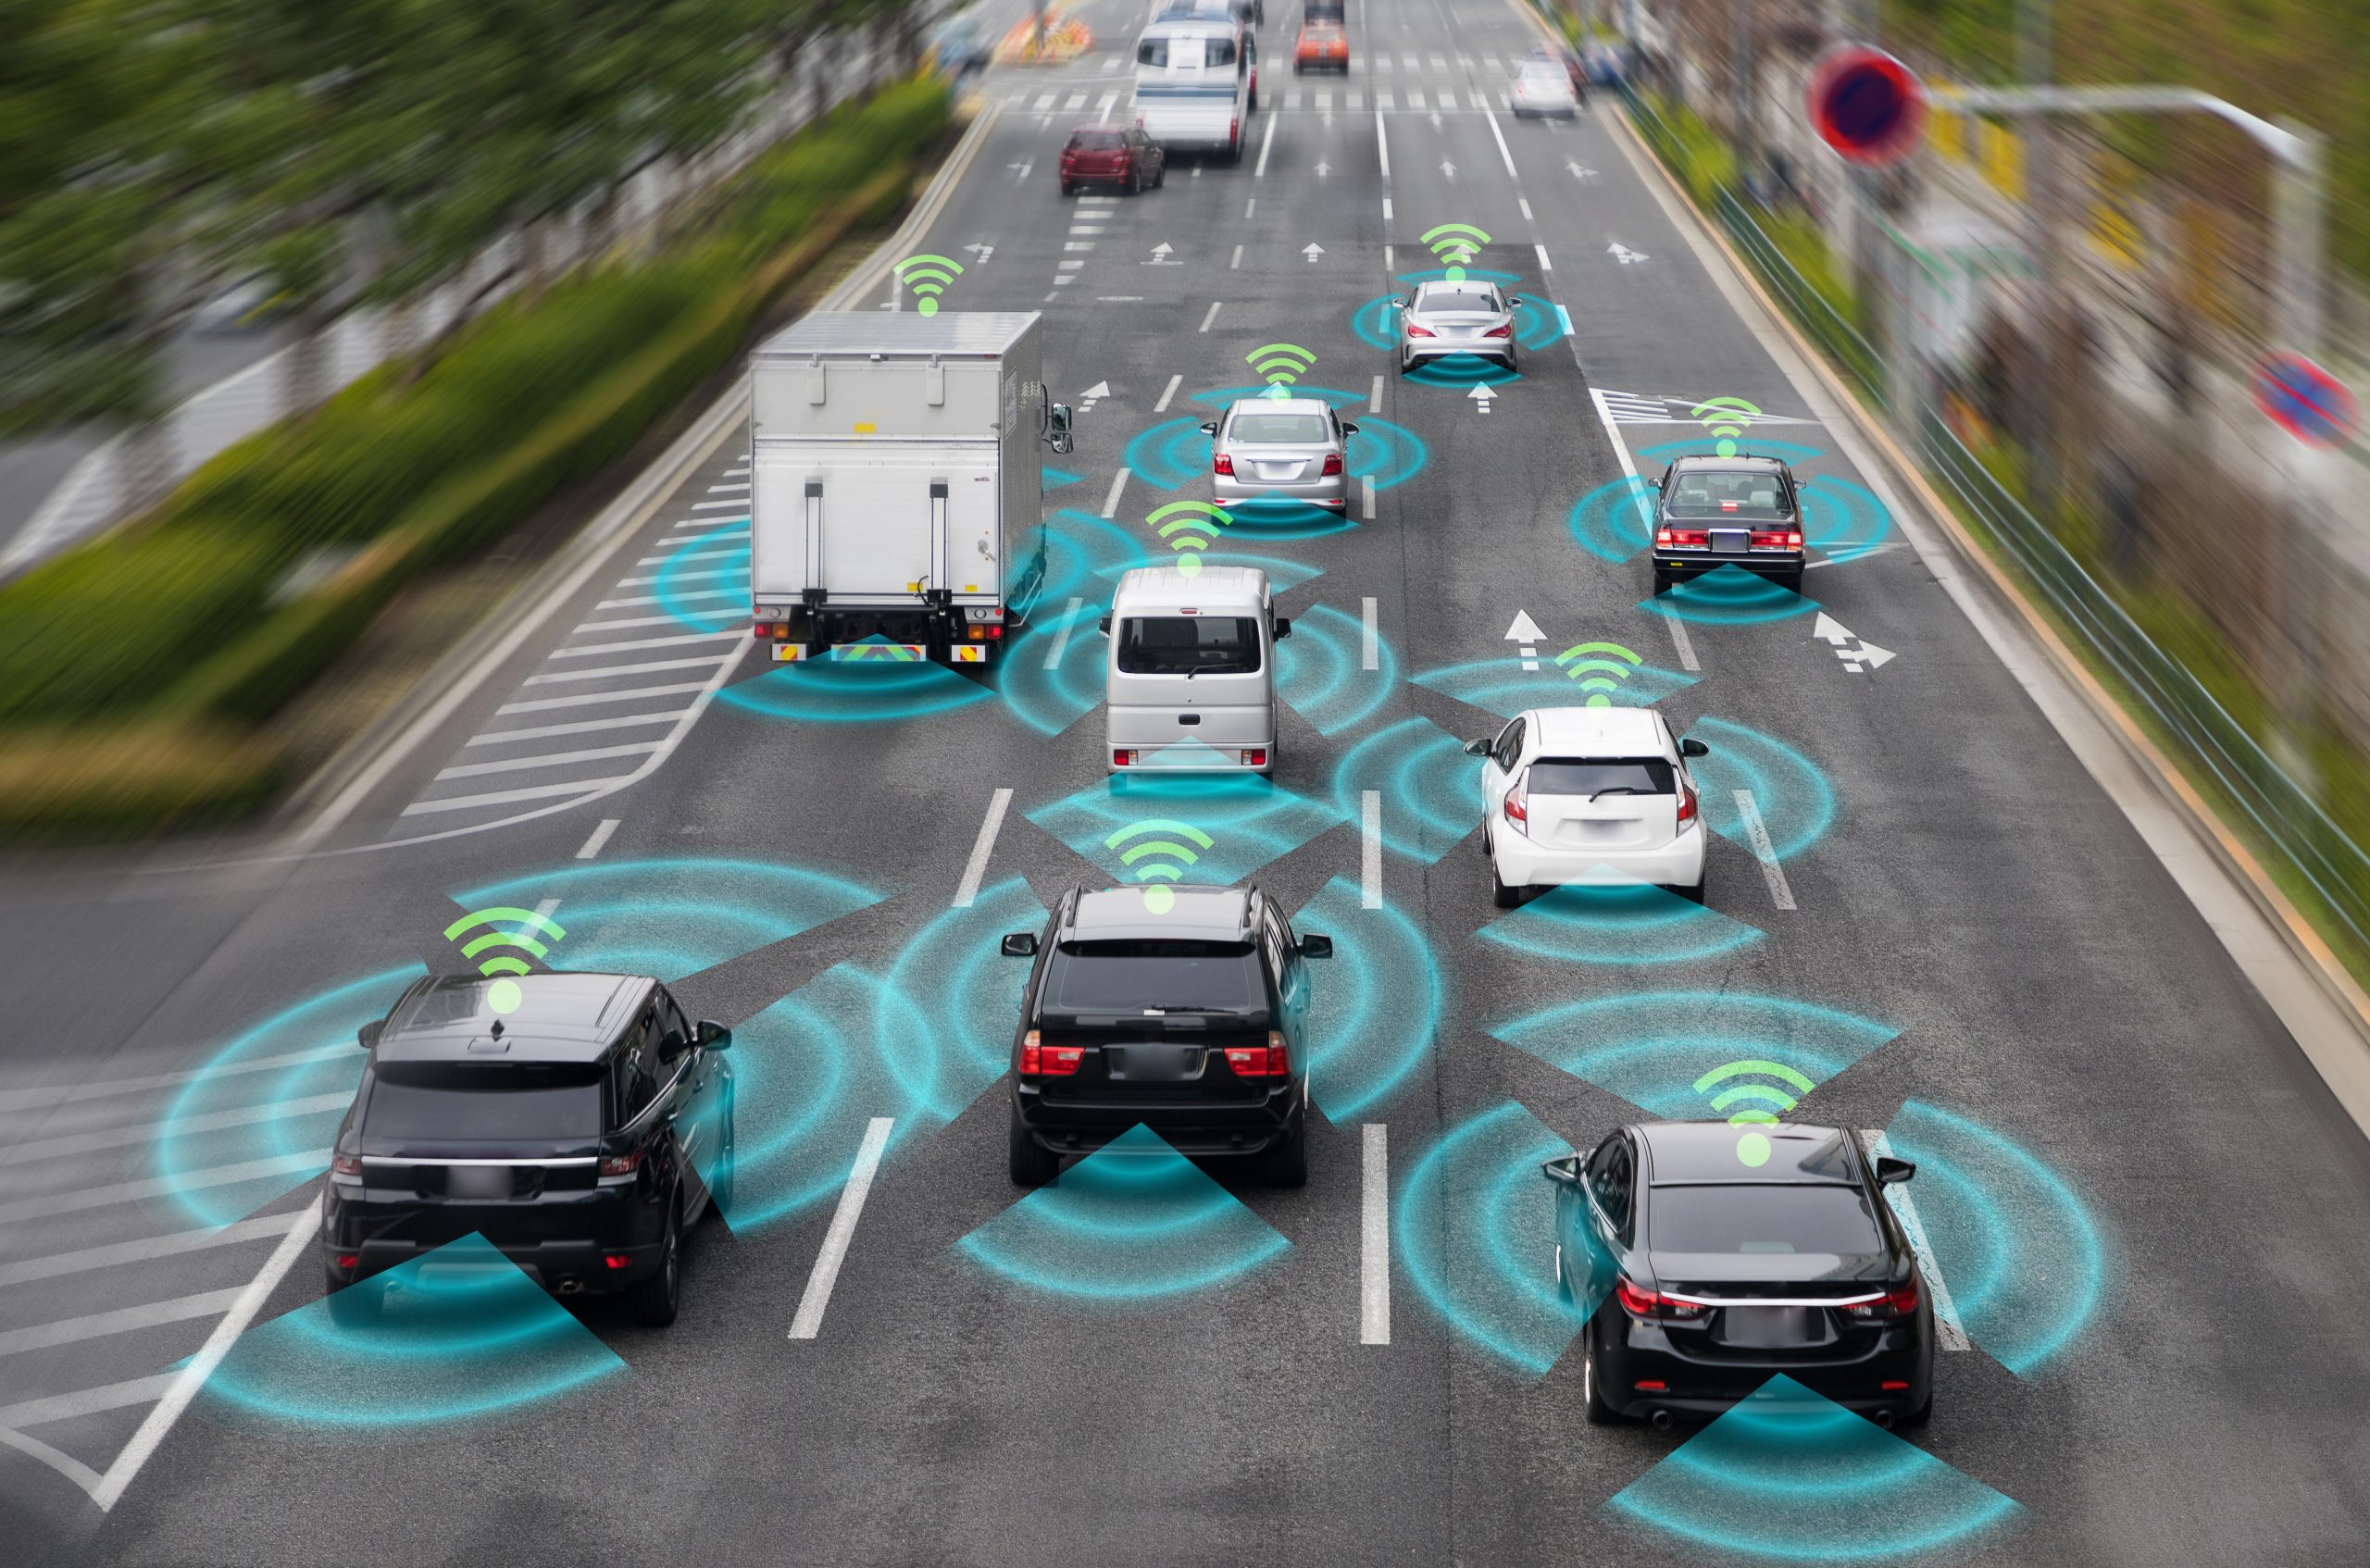 Cars on a multilane road with sensor imagery